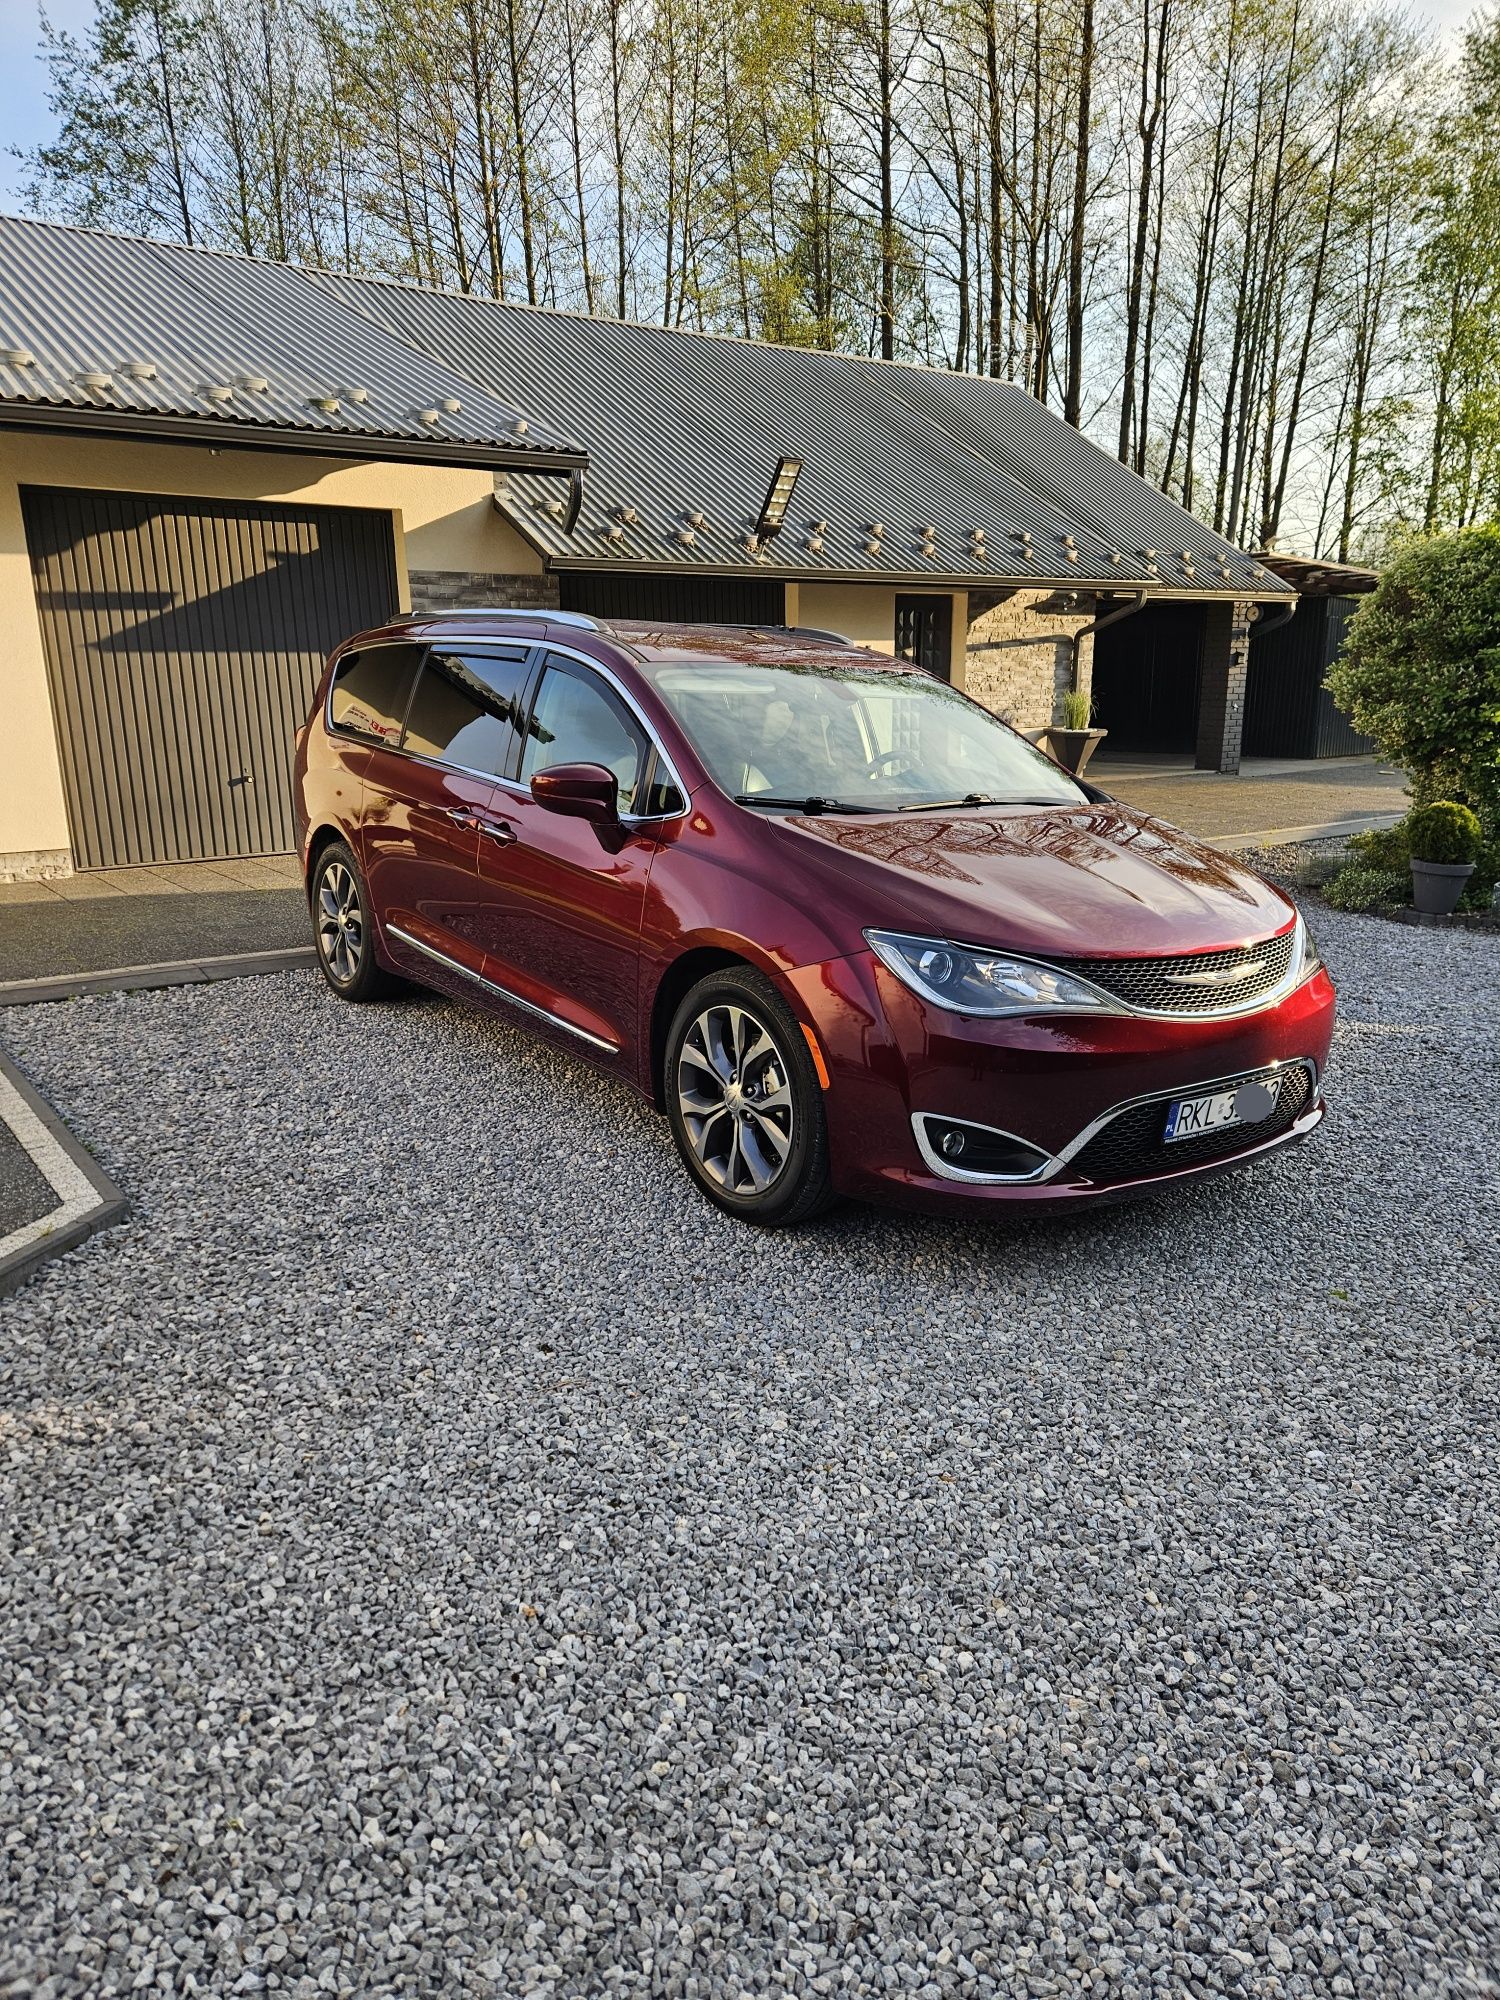 Chrysler Pacifica 2018 r  , 8 osobowy